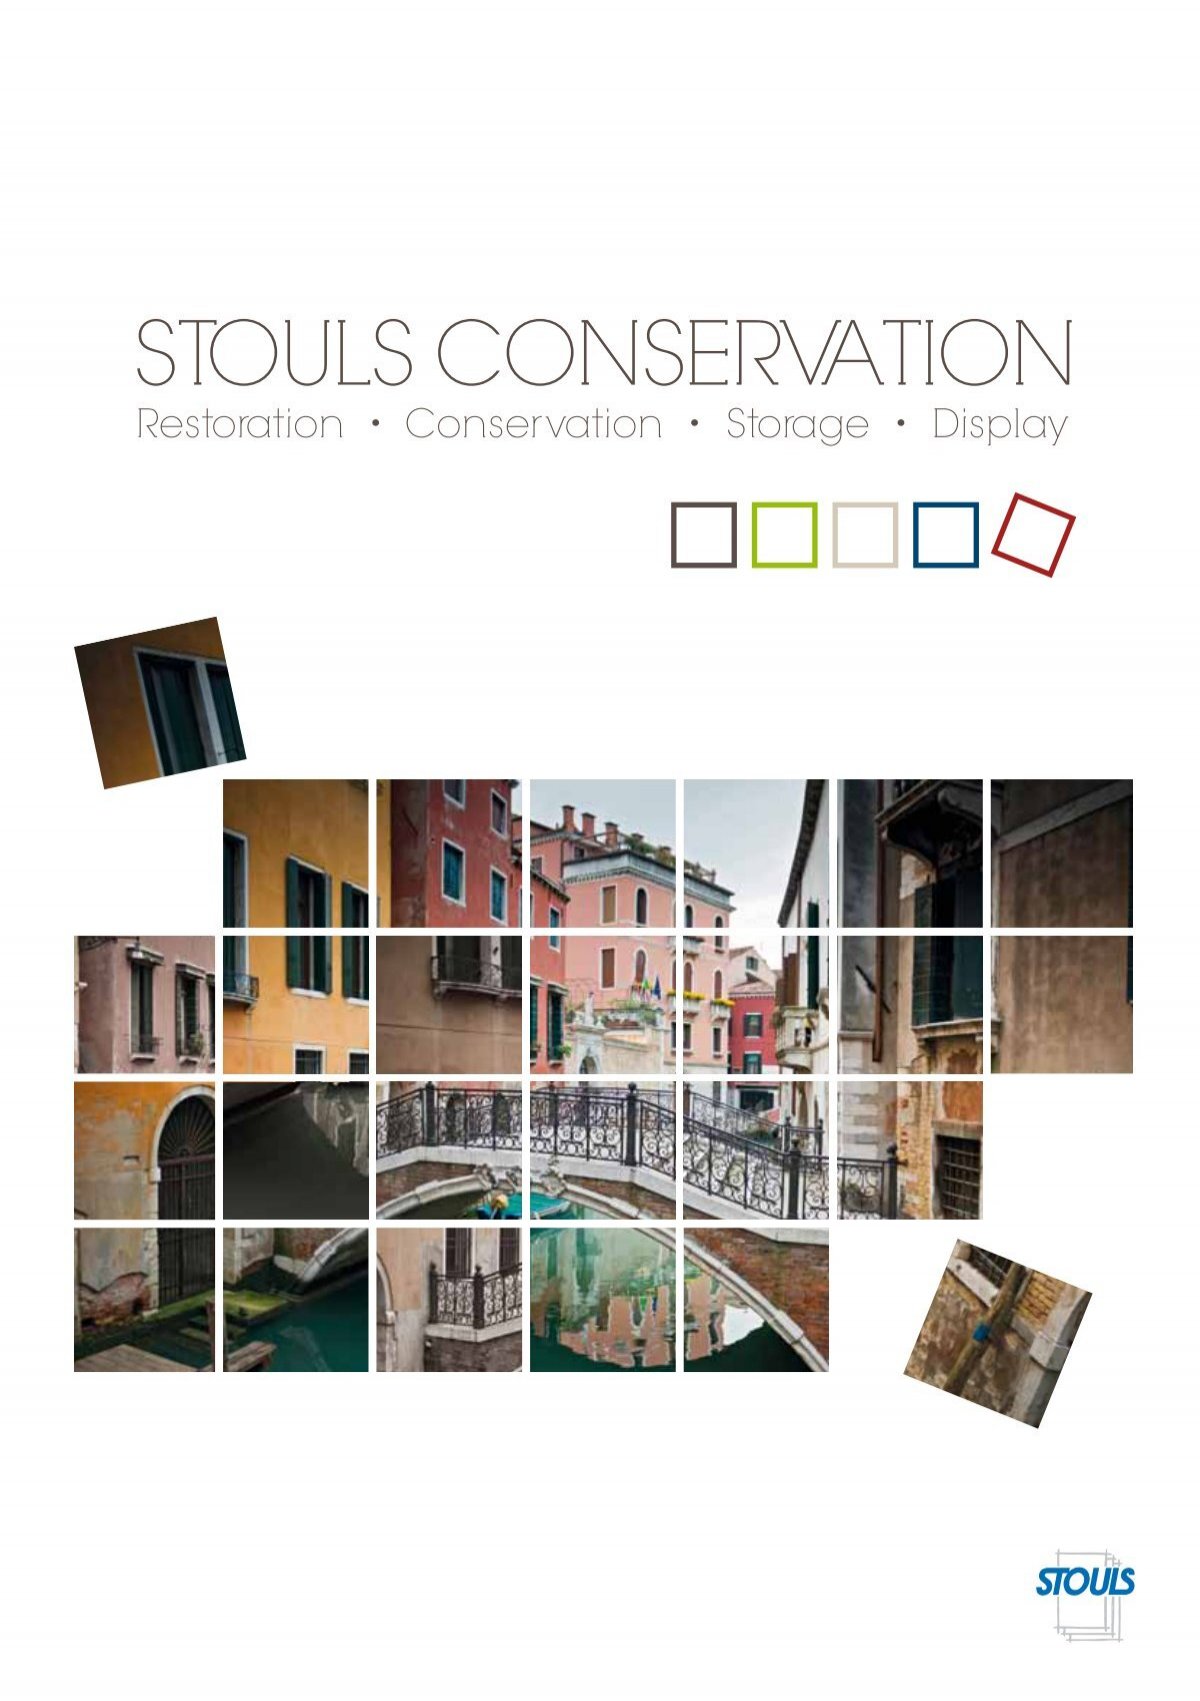 STOULS CONSERVATION